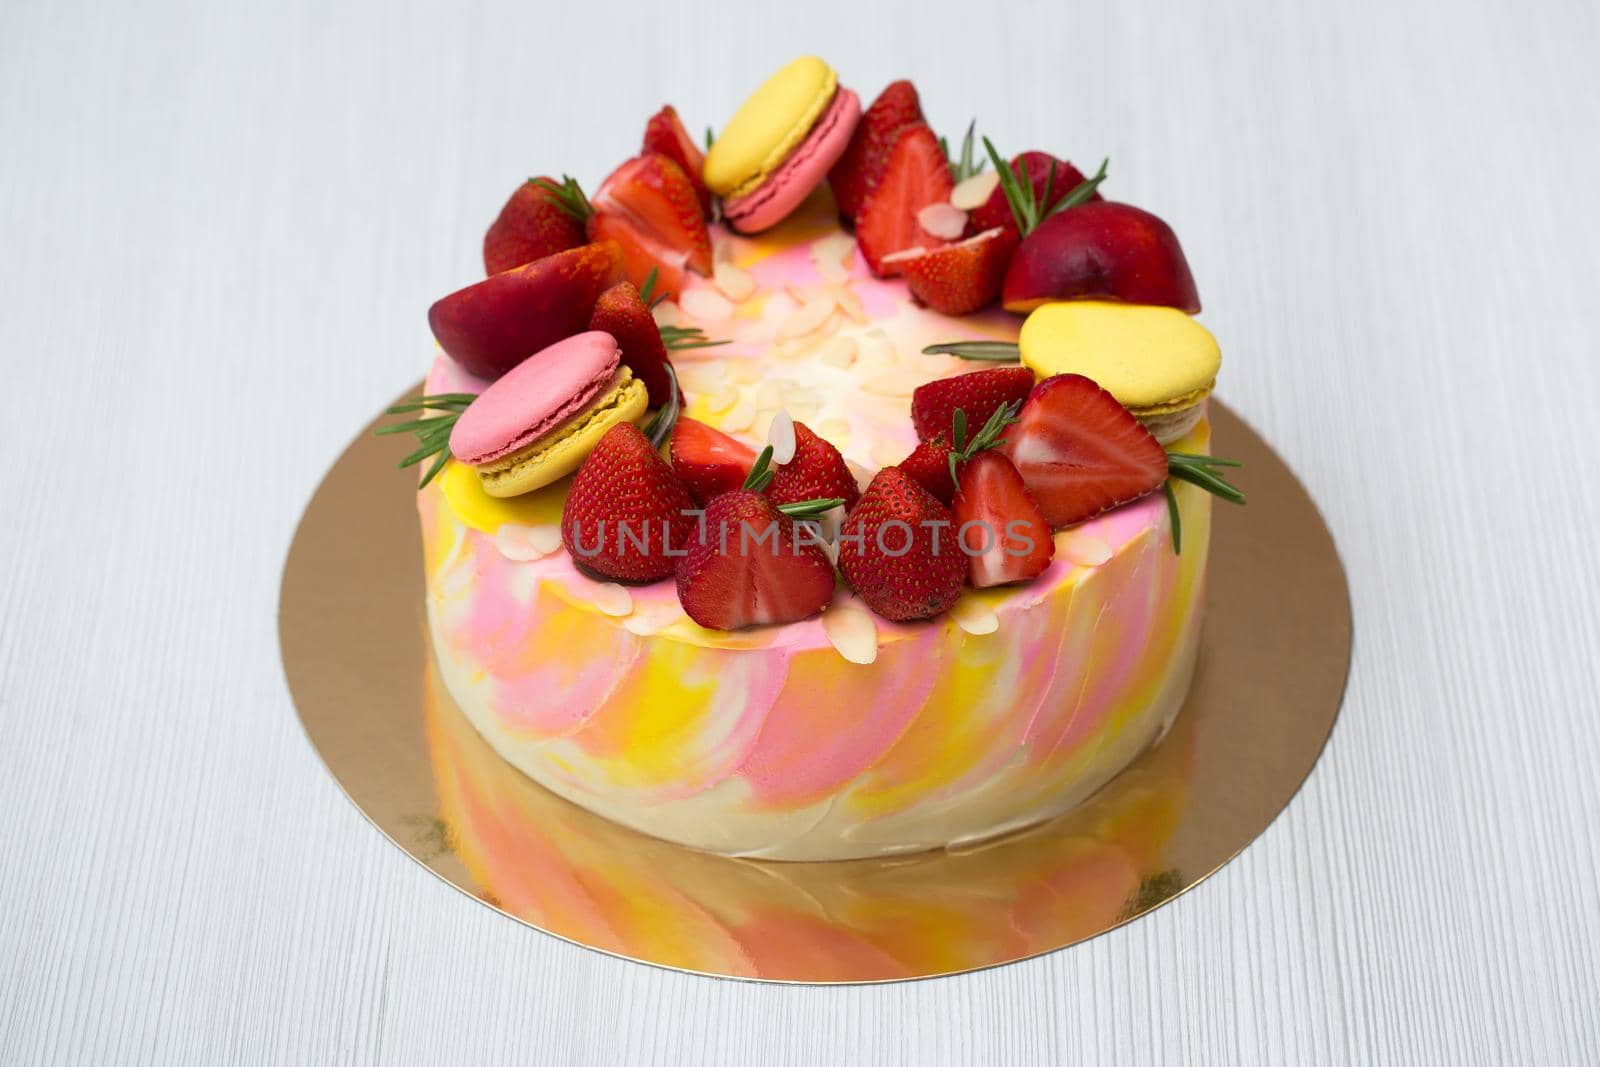 Cake yellow and pink splotches, strawberries, peaches, macaroons, rosemary. by StudioPeace